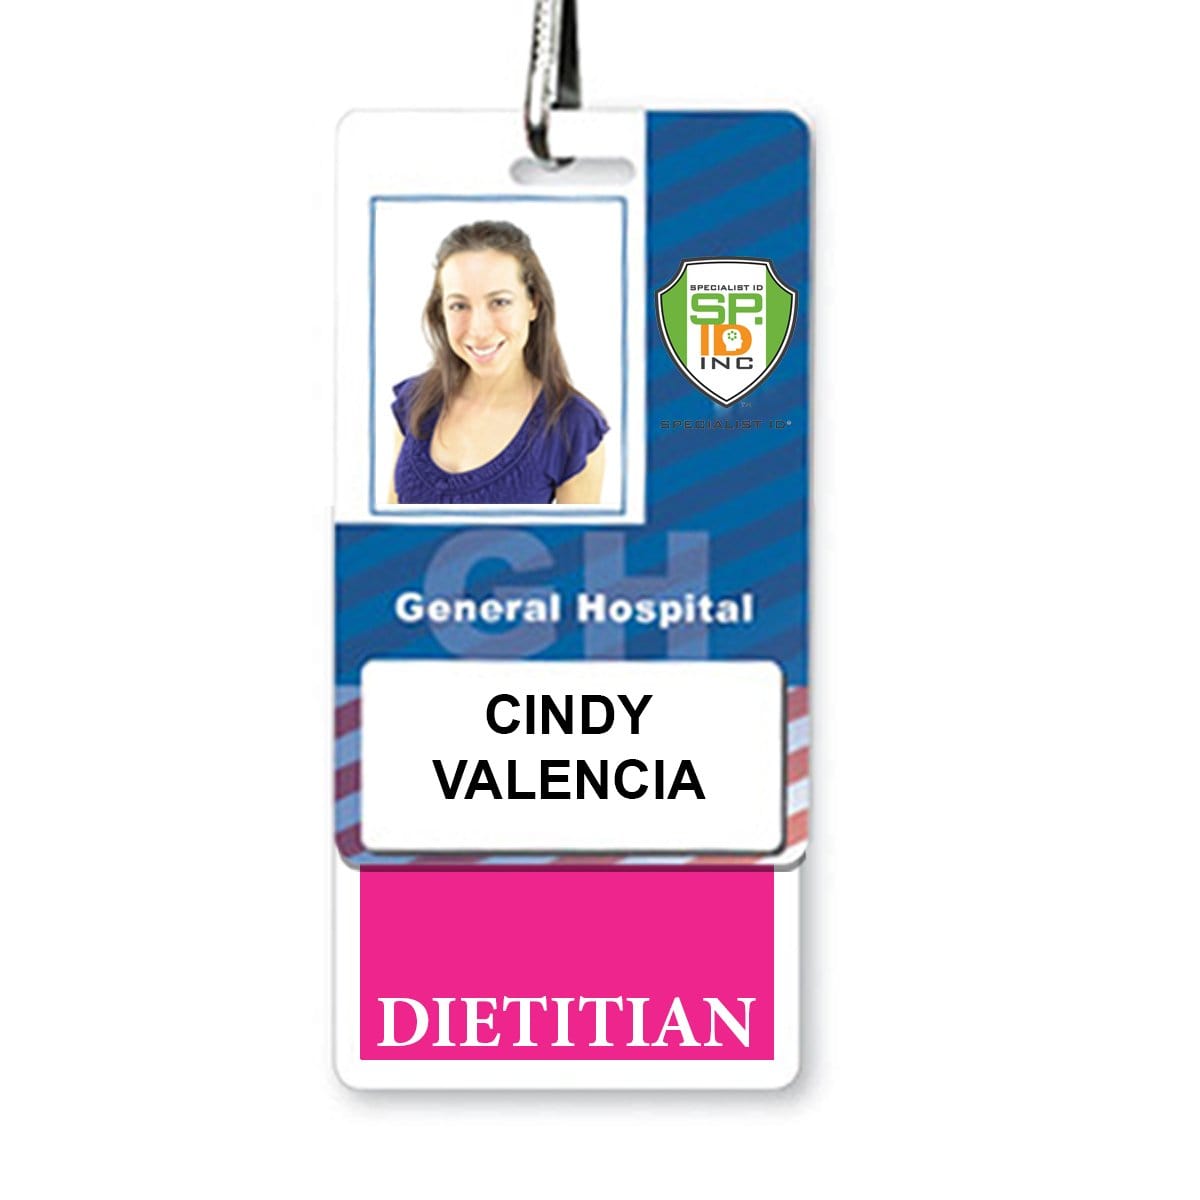 Hot Pink DIETITIAN Badge Buddy with Hot Pink Border - Vertical BB-DIETITIAN-HOTPINK-V